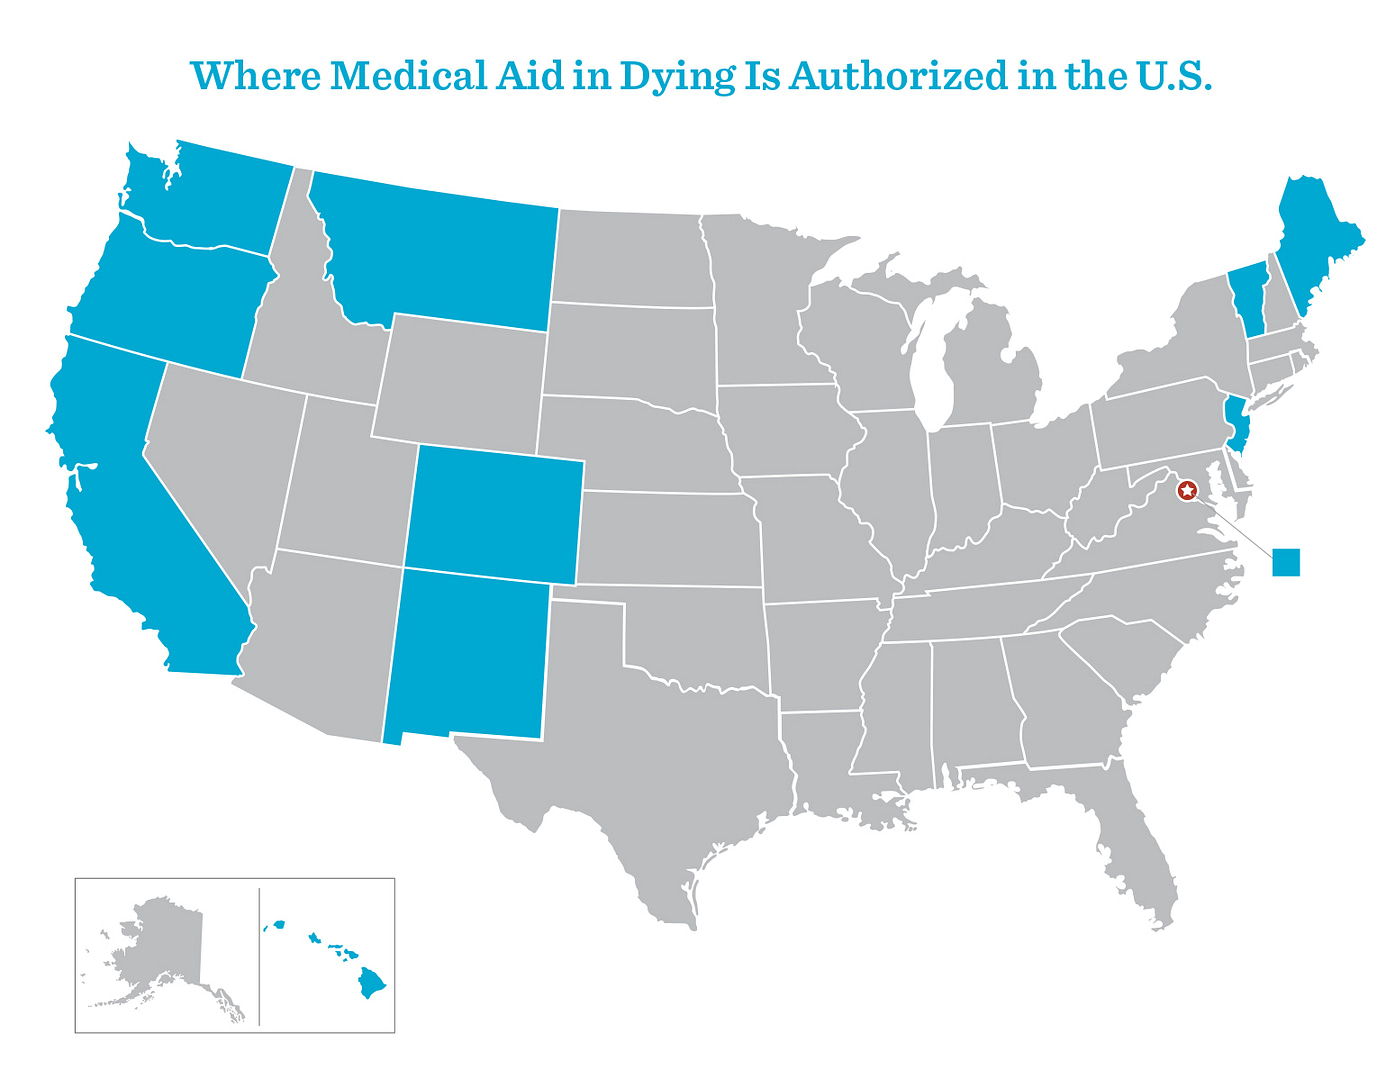 Map of the United States with states that have authorized Medical Aid in Dying Highlighted